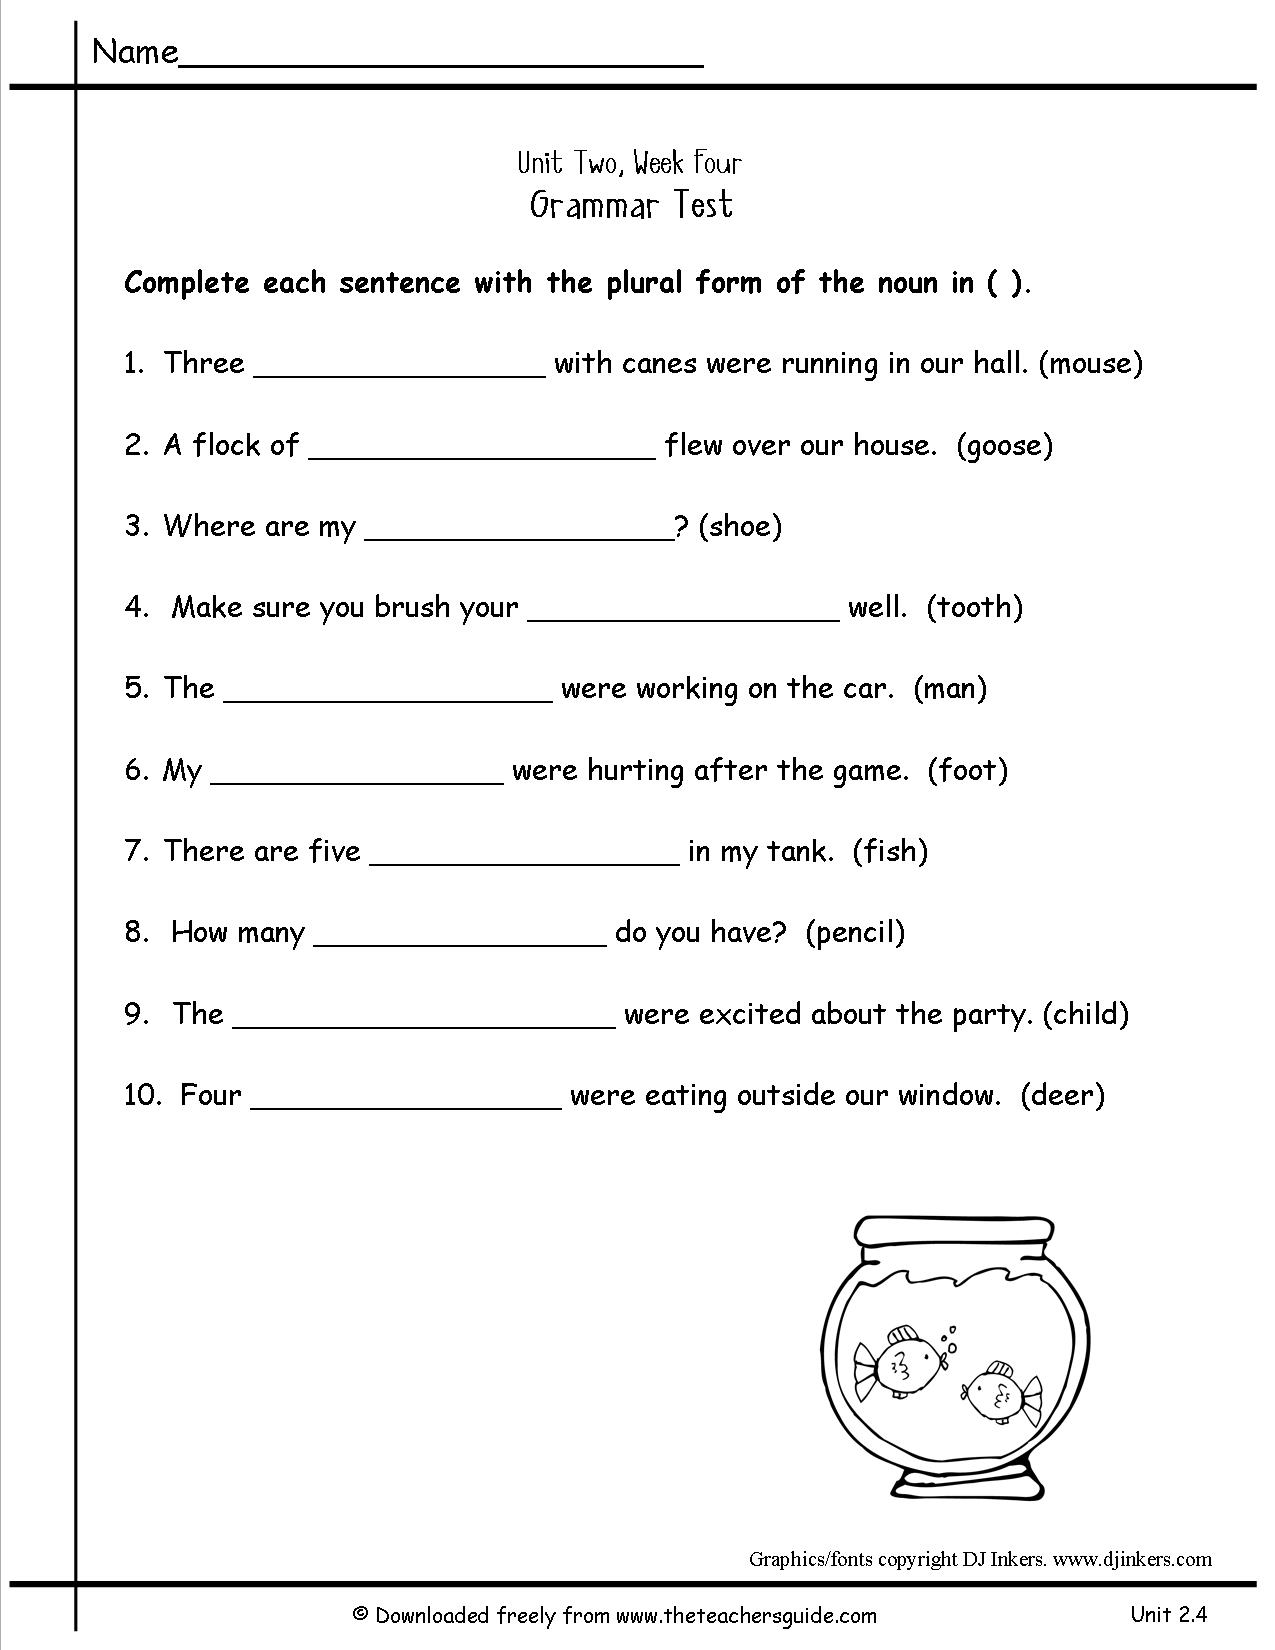 17 Best Images Of Printable Suffixes Worksheets Latin Roots Prefixes And Suffixes Suffixes